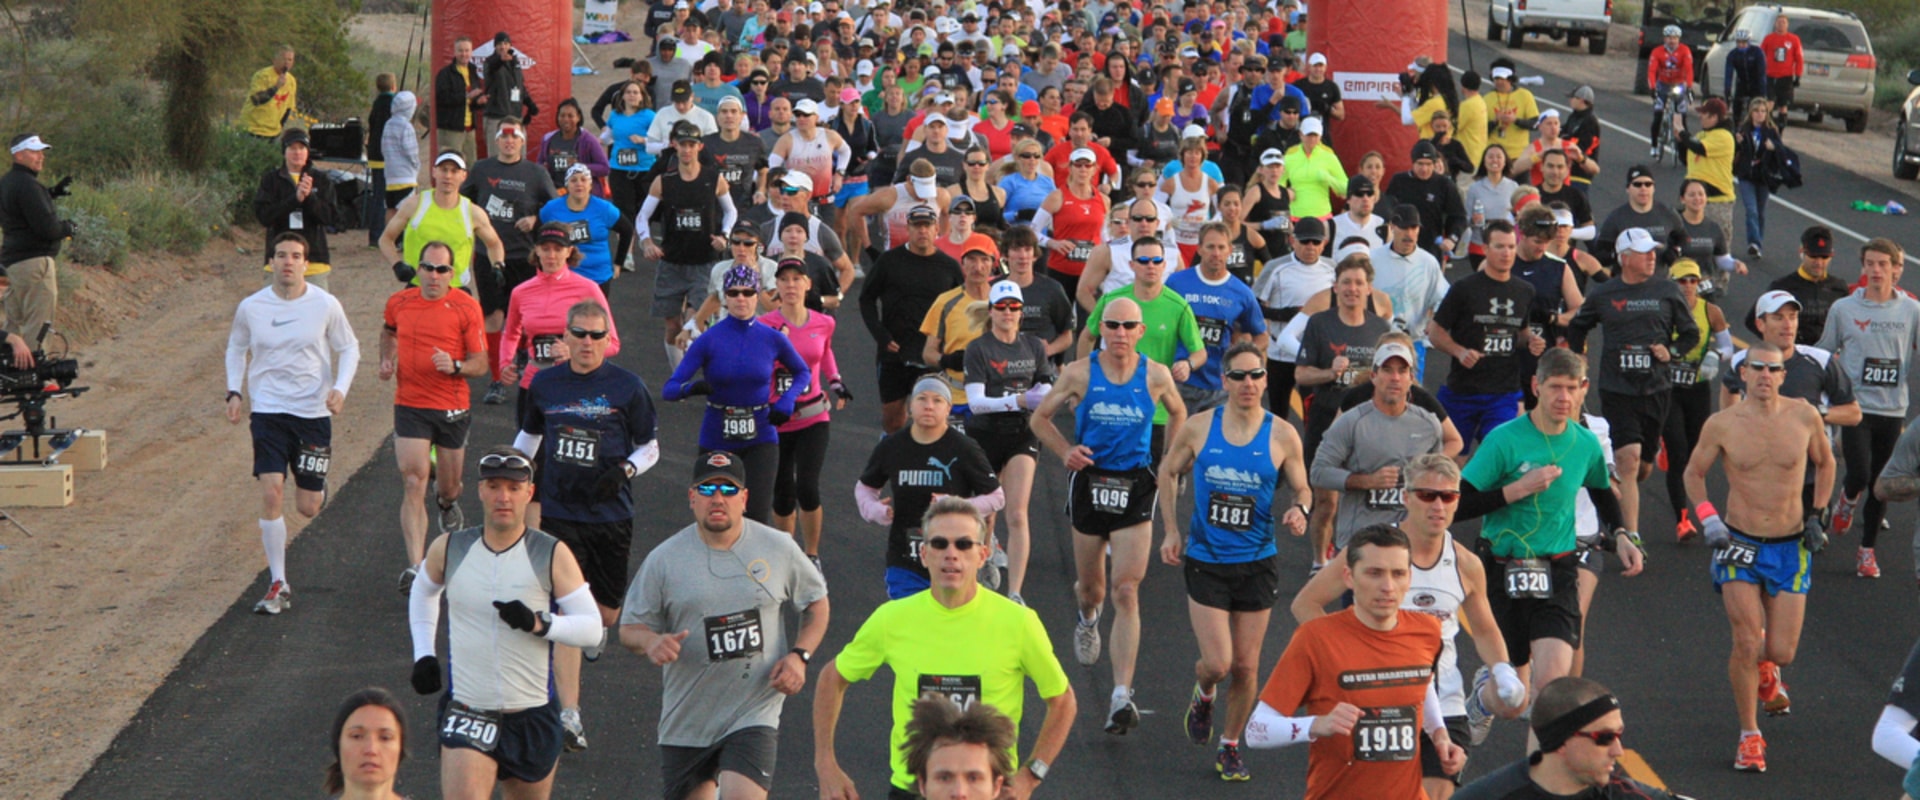 The Best Running Competitions For Every Skill Level In Maricopa County